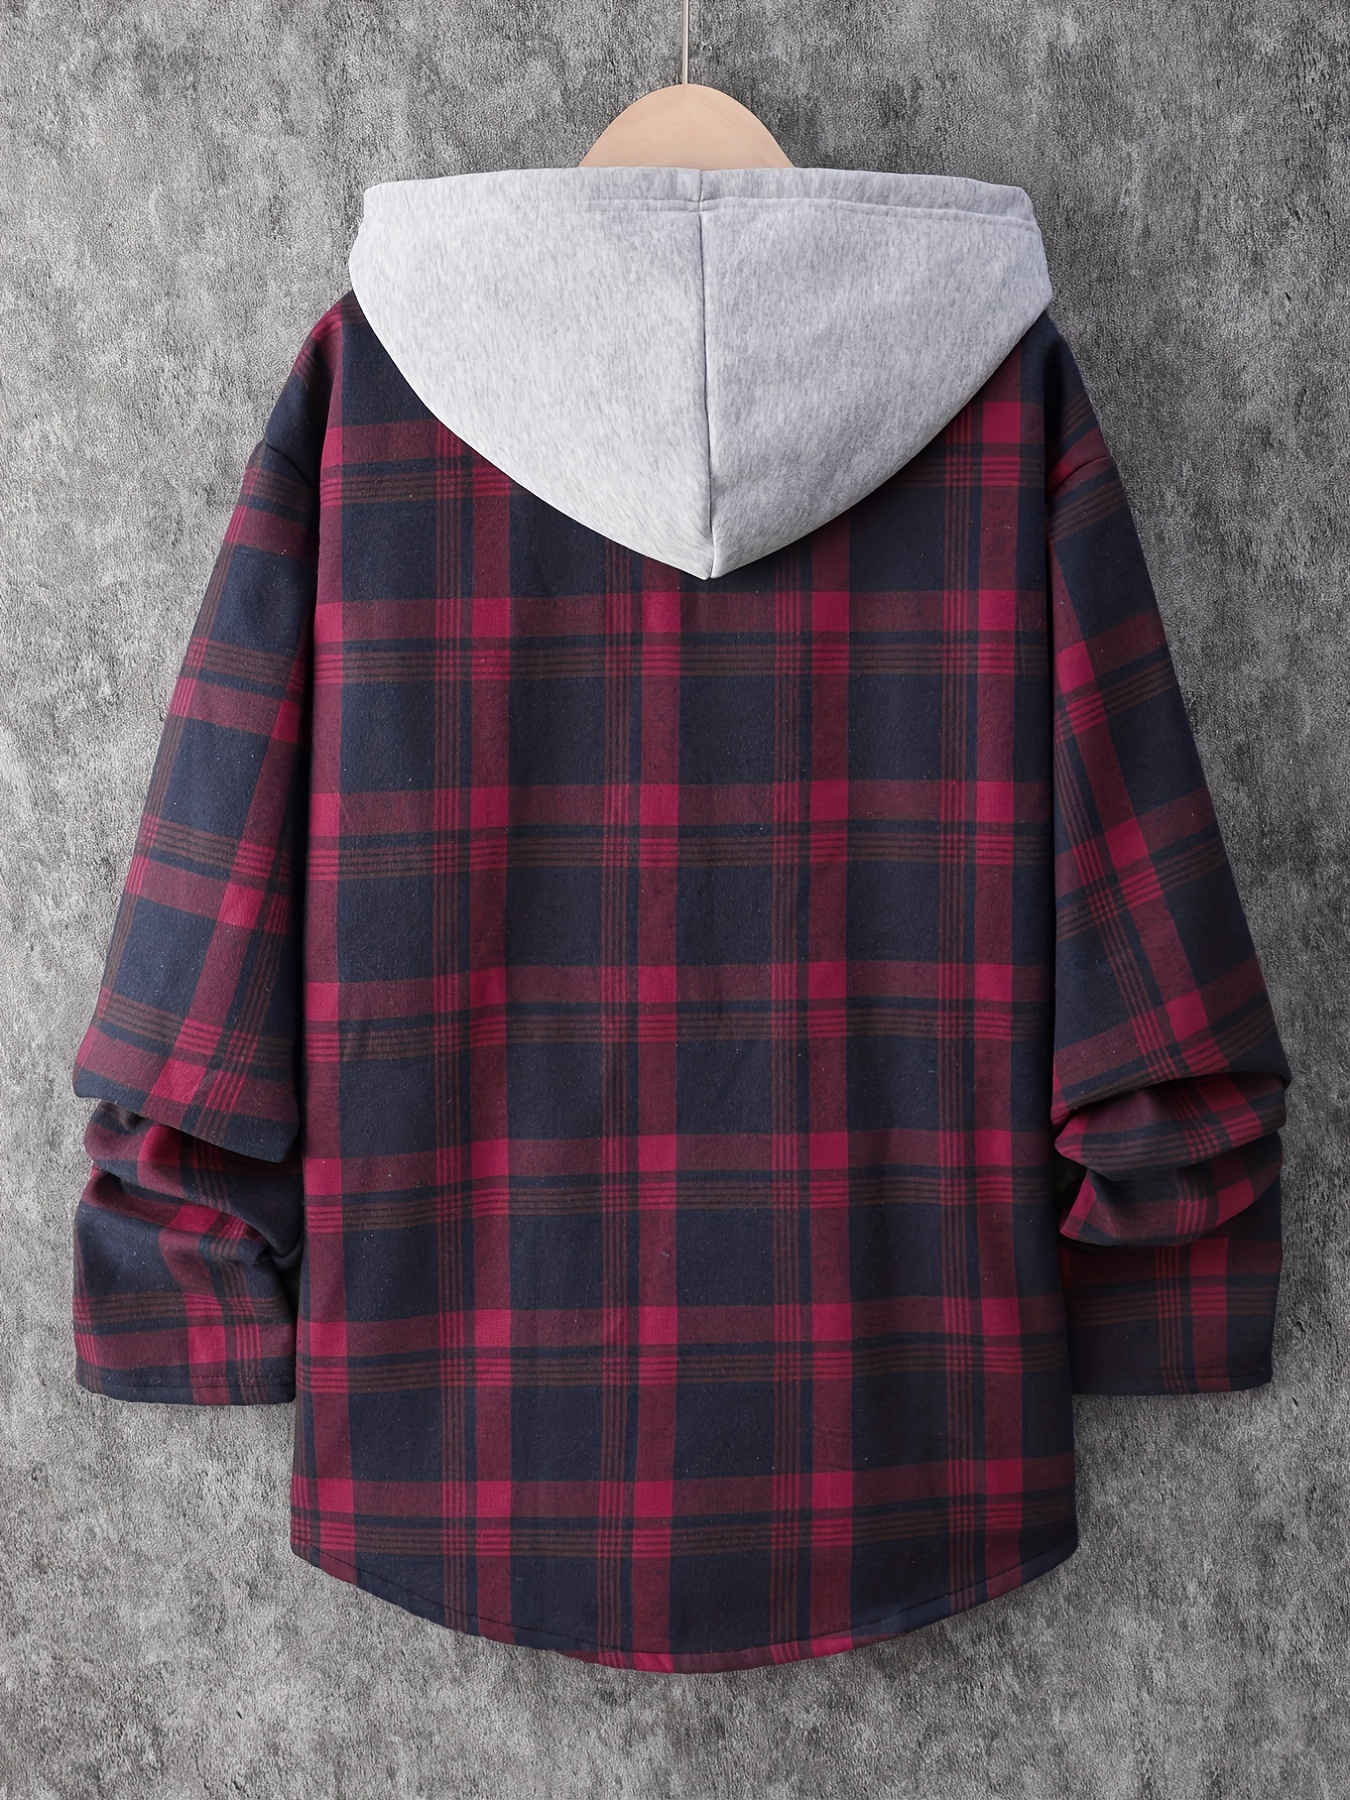 Plaid Shirt Coat For Men Long Sleeve Casual Regular Fit Button Up Hooded  Shirts Jacket Shacket